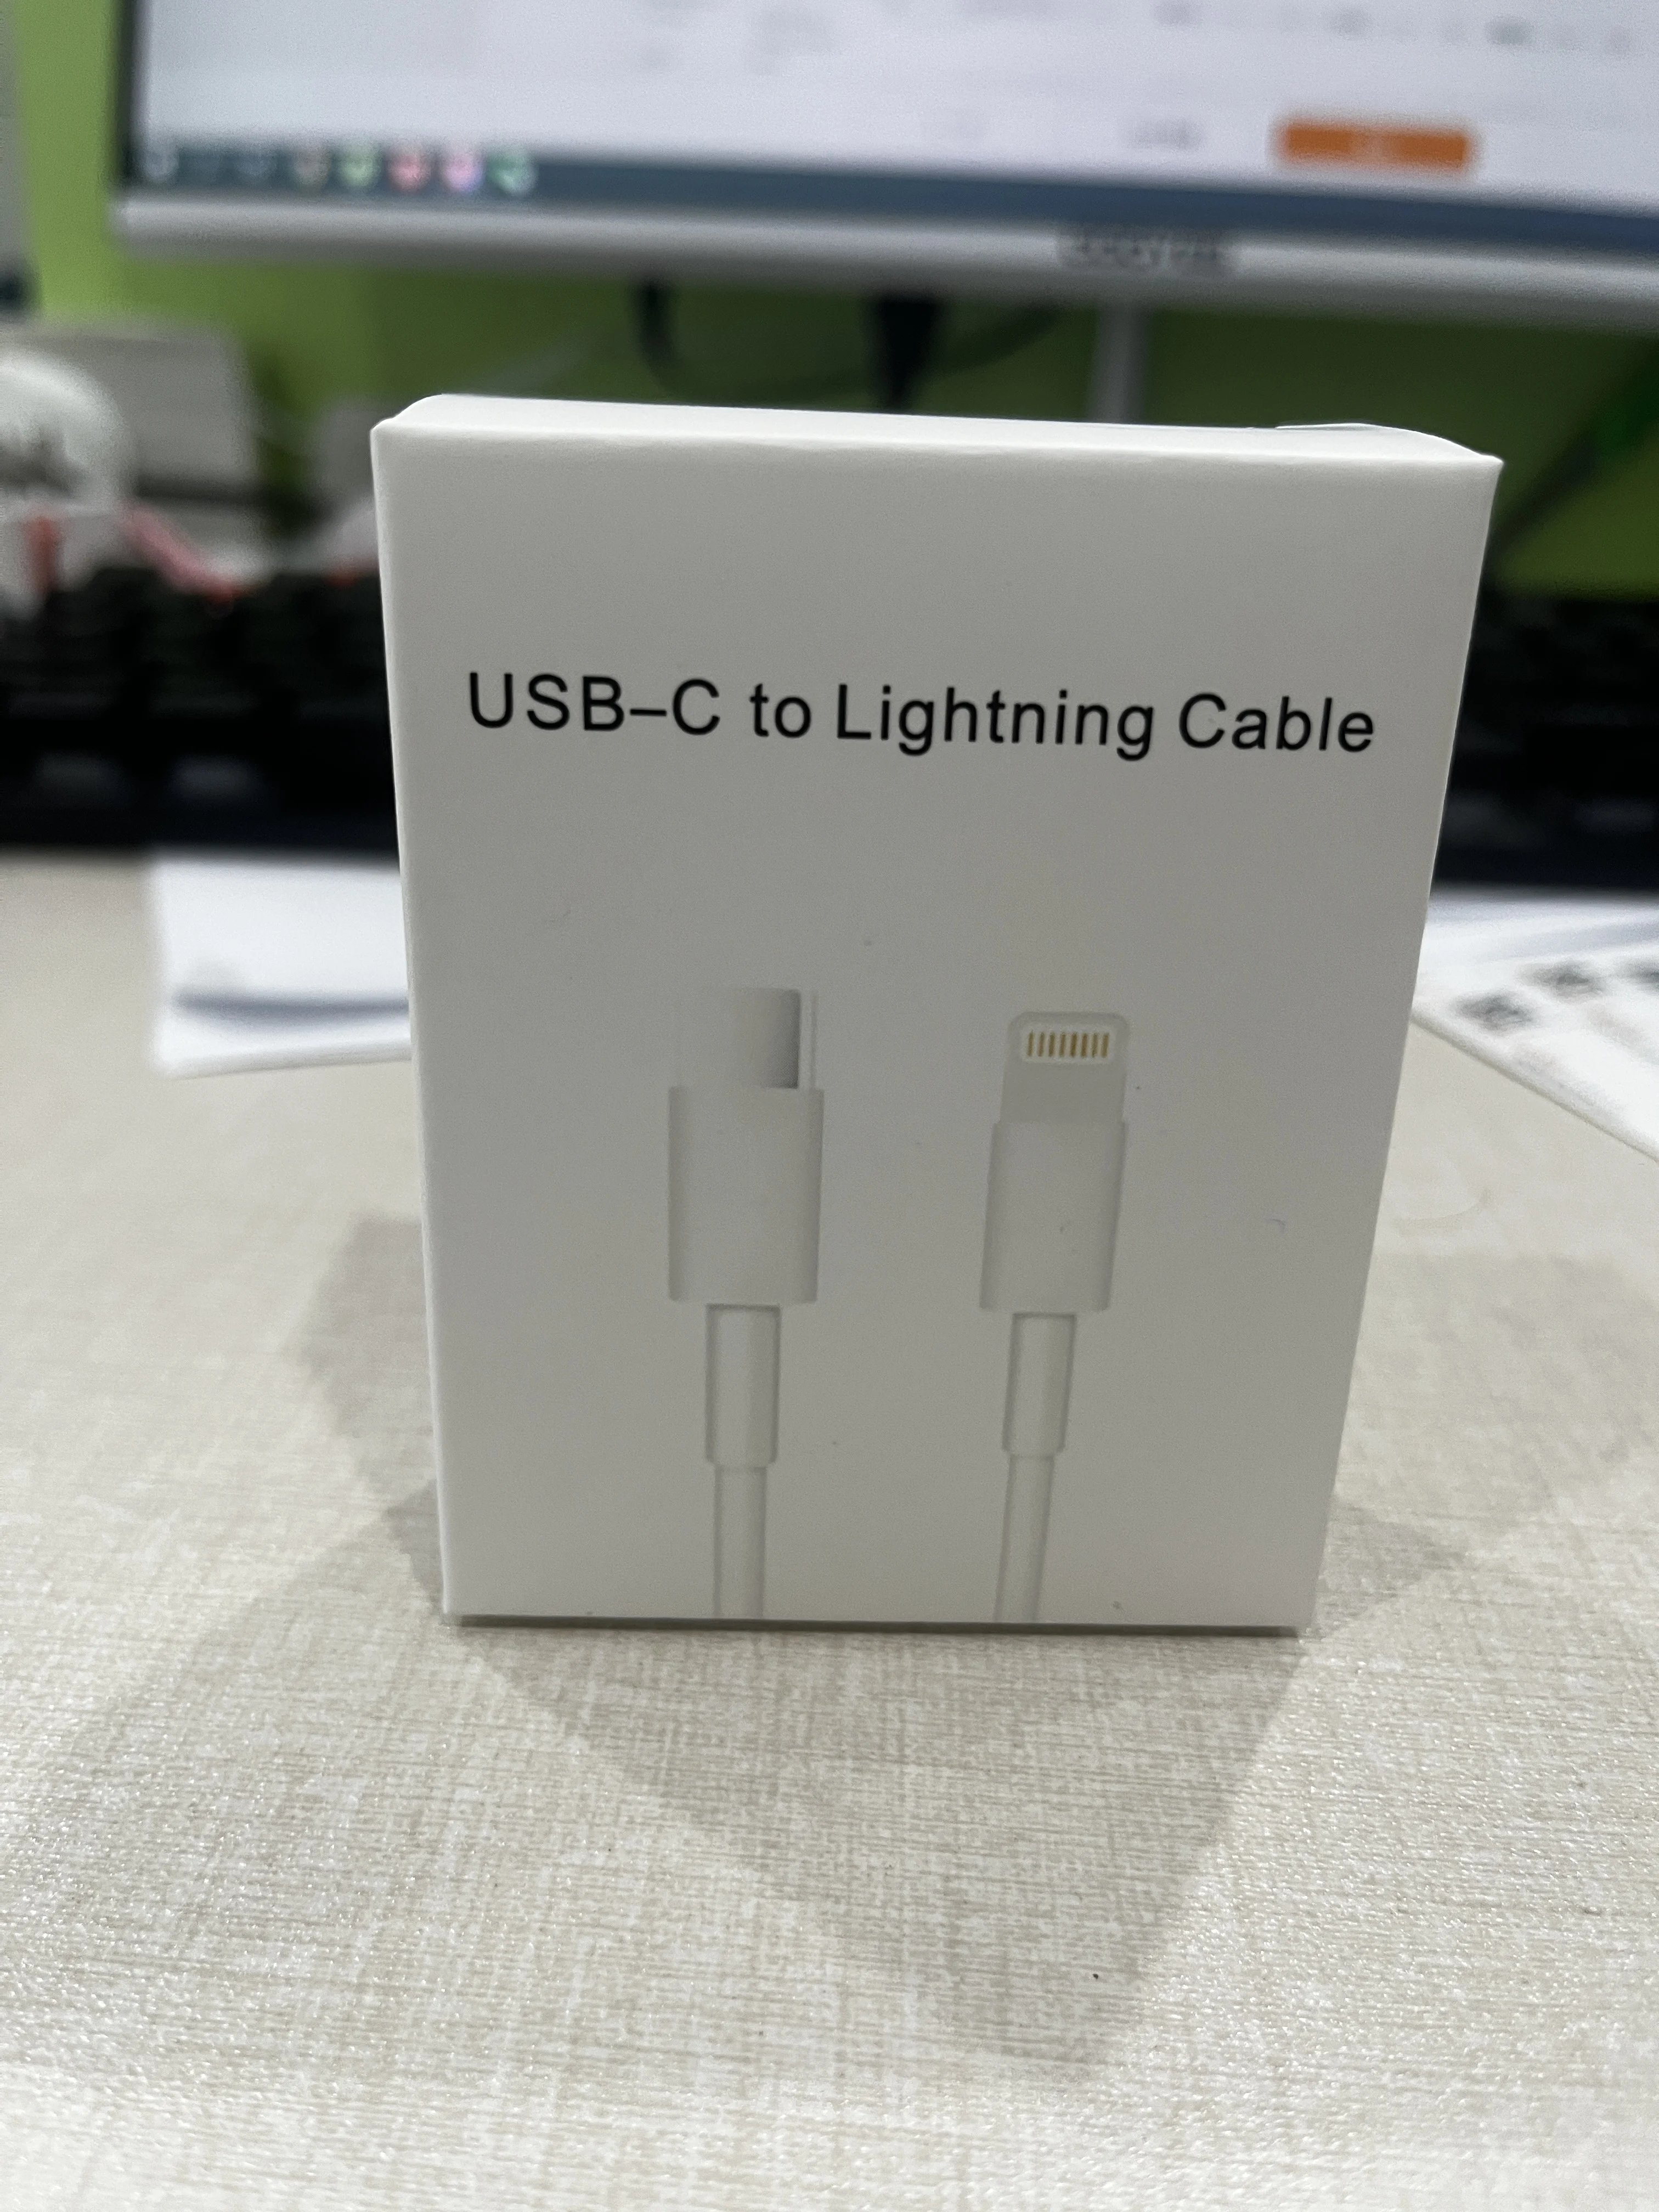 

10Pcs/lot 20W PD Fast Charging 1M USB C Charger Cable For iphone 13Pro 12 11 pro Max Xs XR 8 7 6s Type C With Retail Box